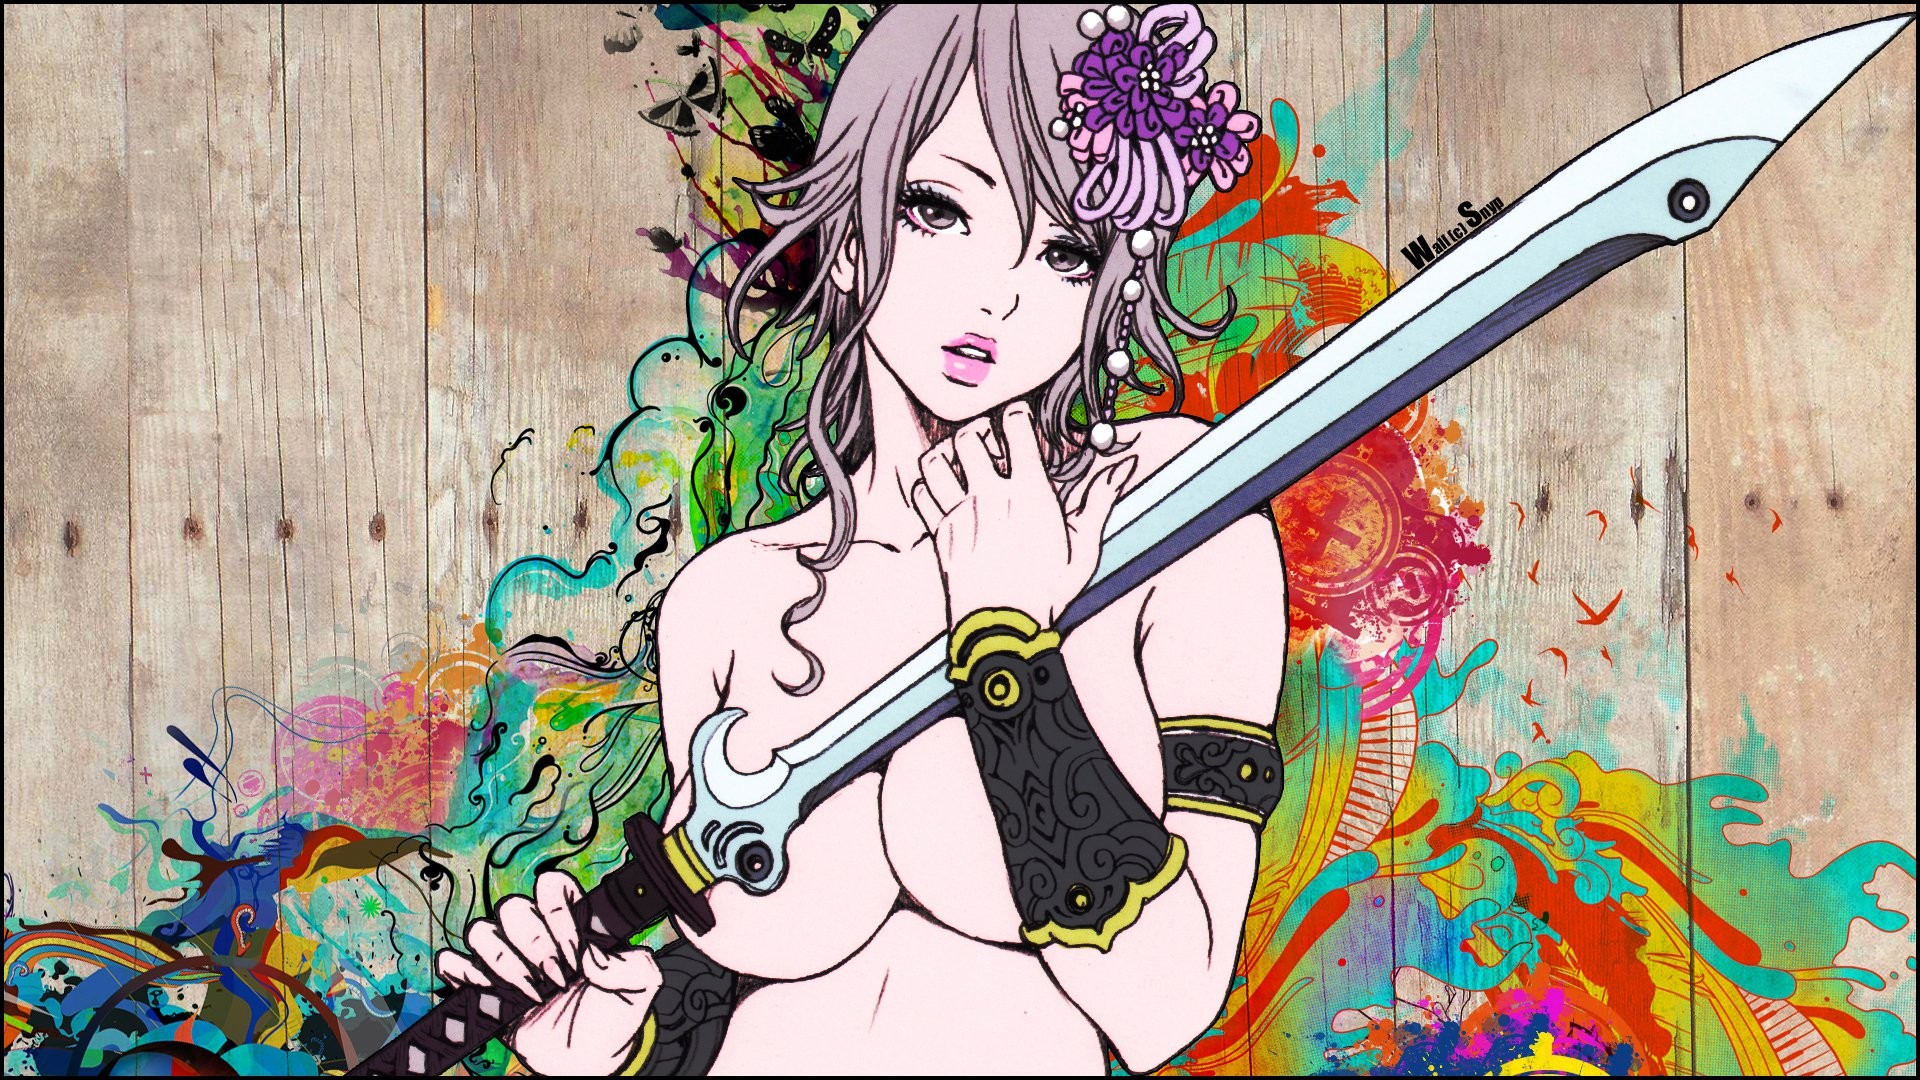 Anime 1920x1080 women cleavage fantasy art sword big boobs colorful texture boobs Snyp fantasy girl women with swords strategic covering looking at viewer flower in hair anime anime girls